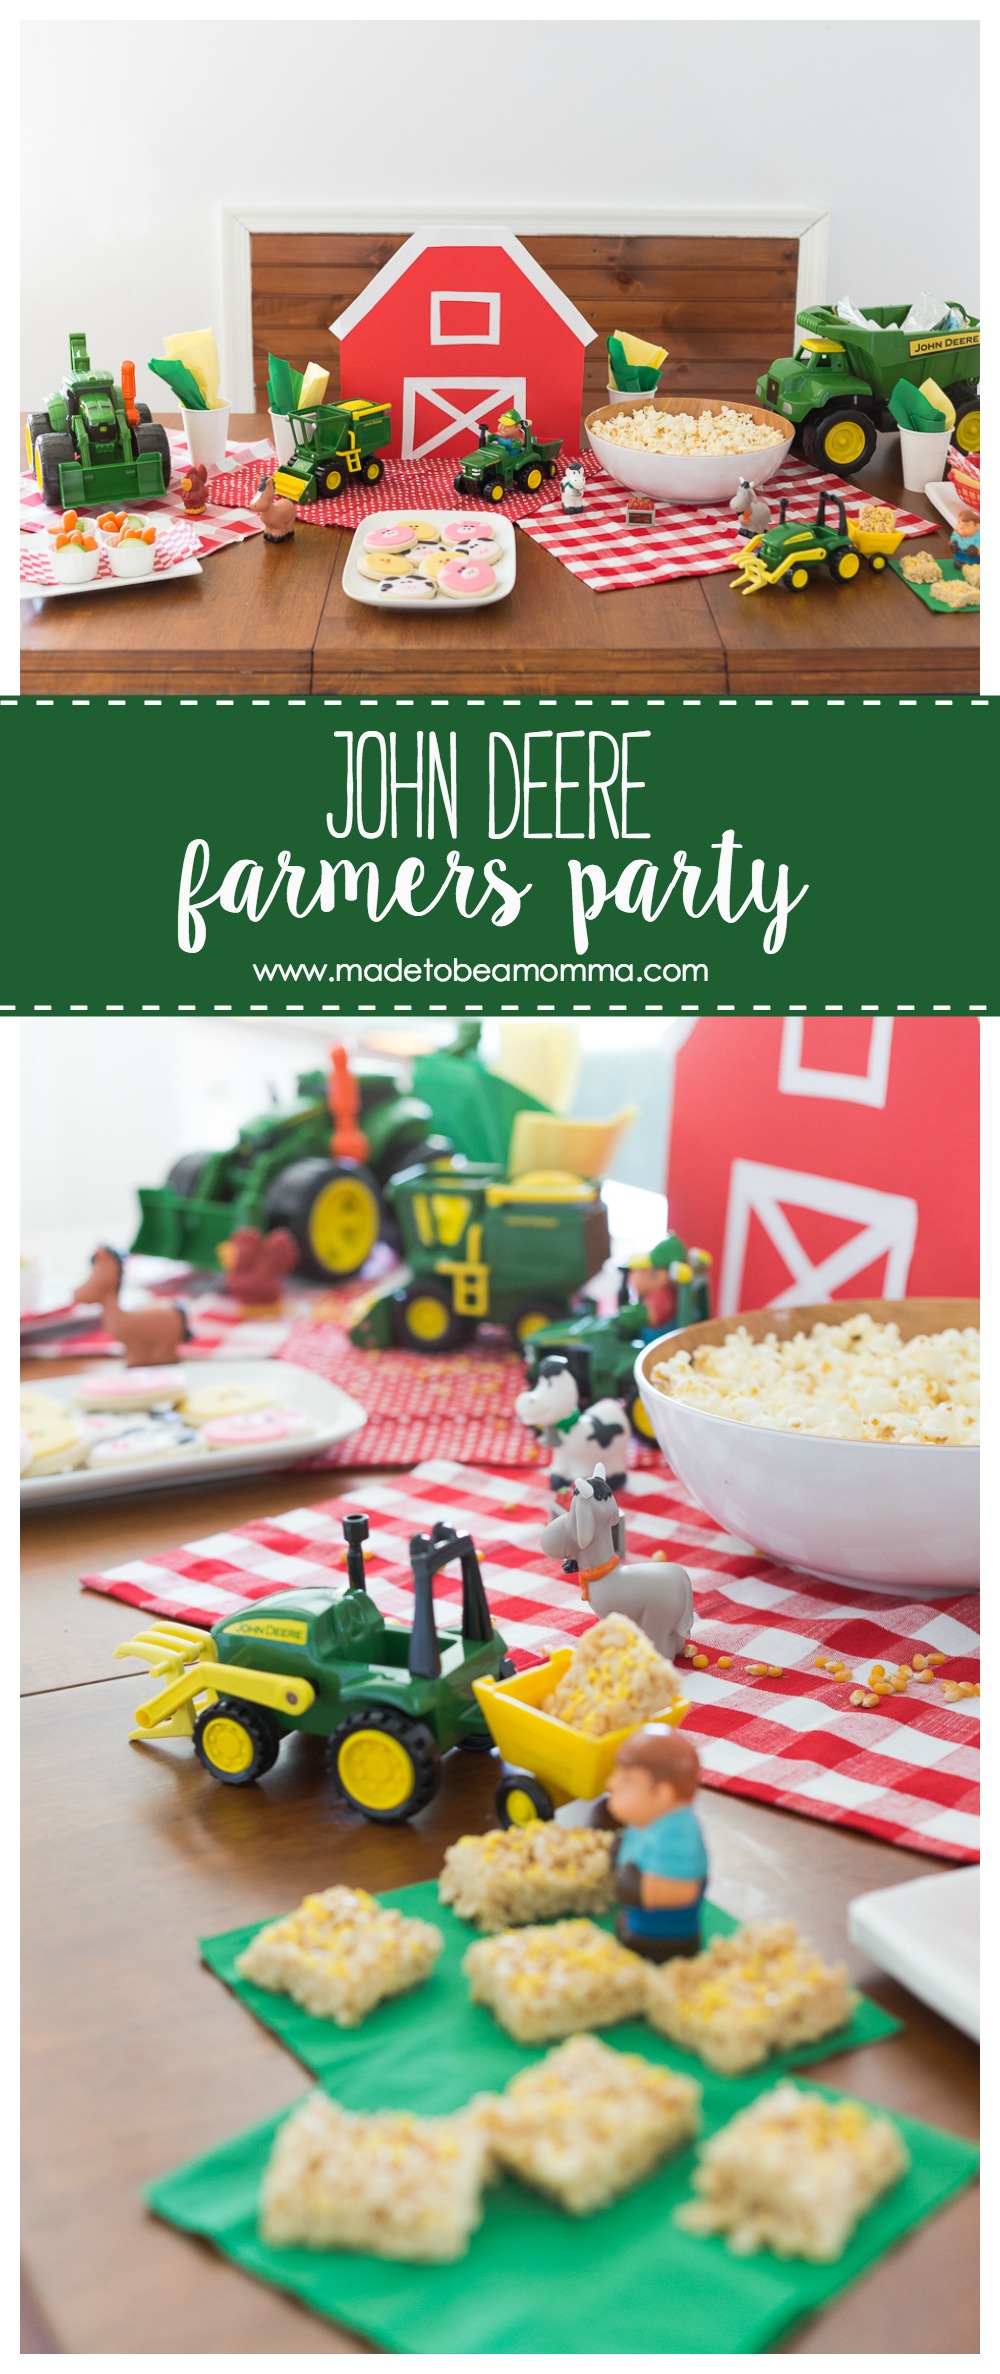 John Deere - Farmers Party: a farm party any tractor loving child will enjoy! Tractors, farm animals, snacks and more!